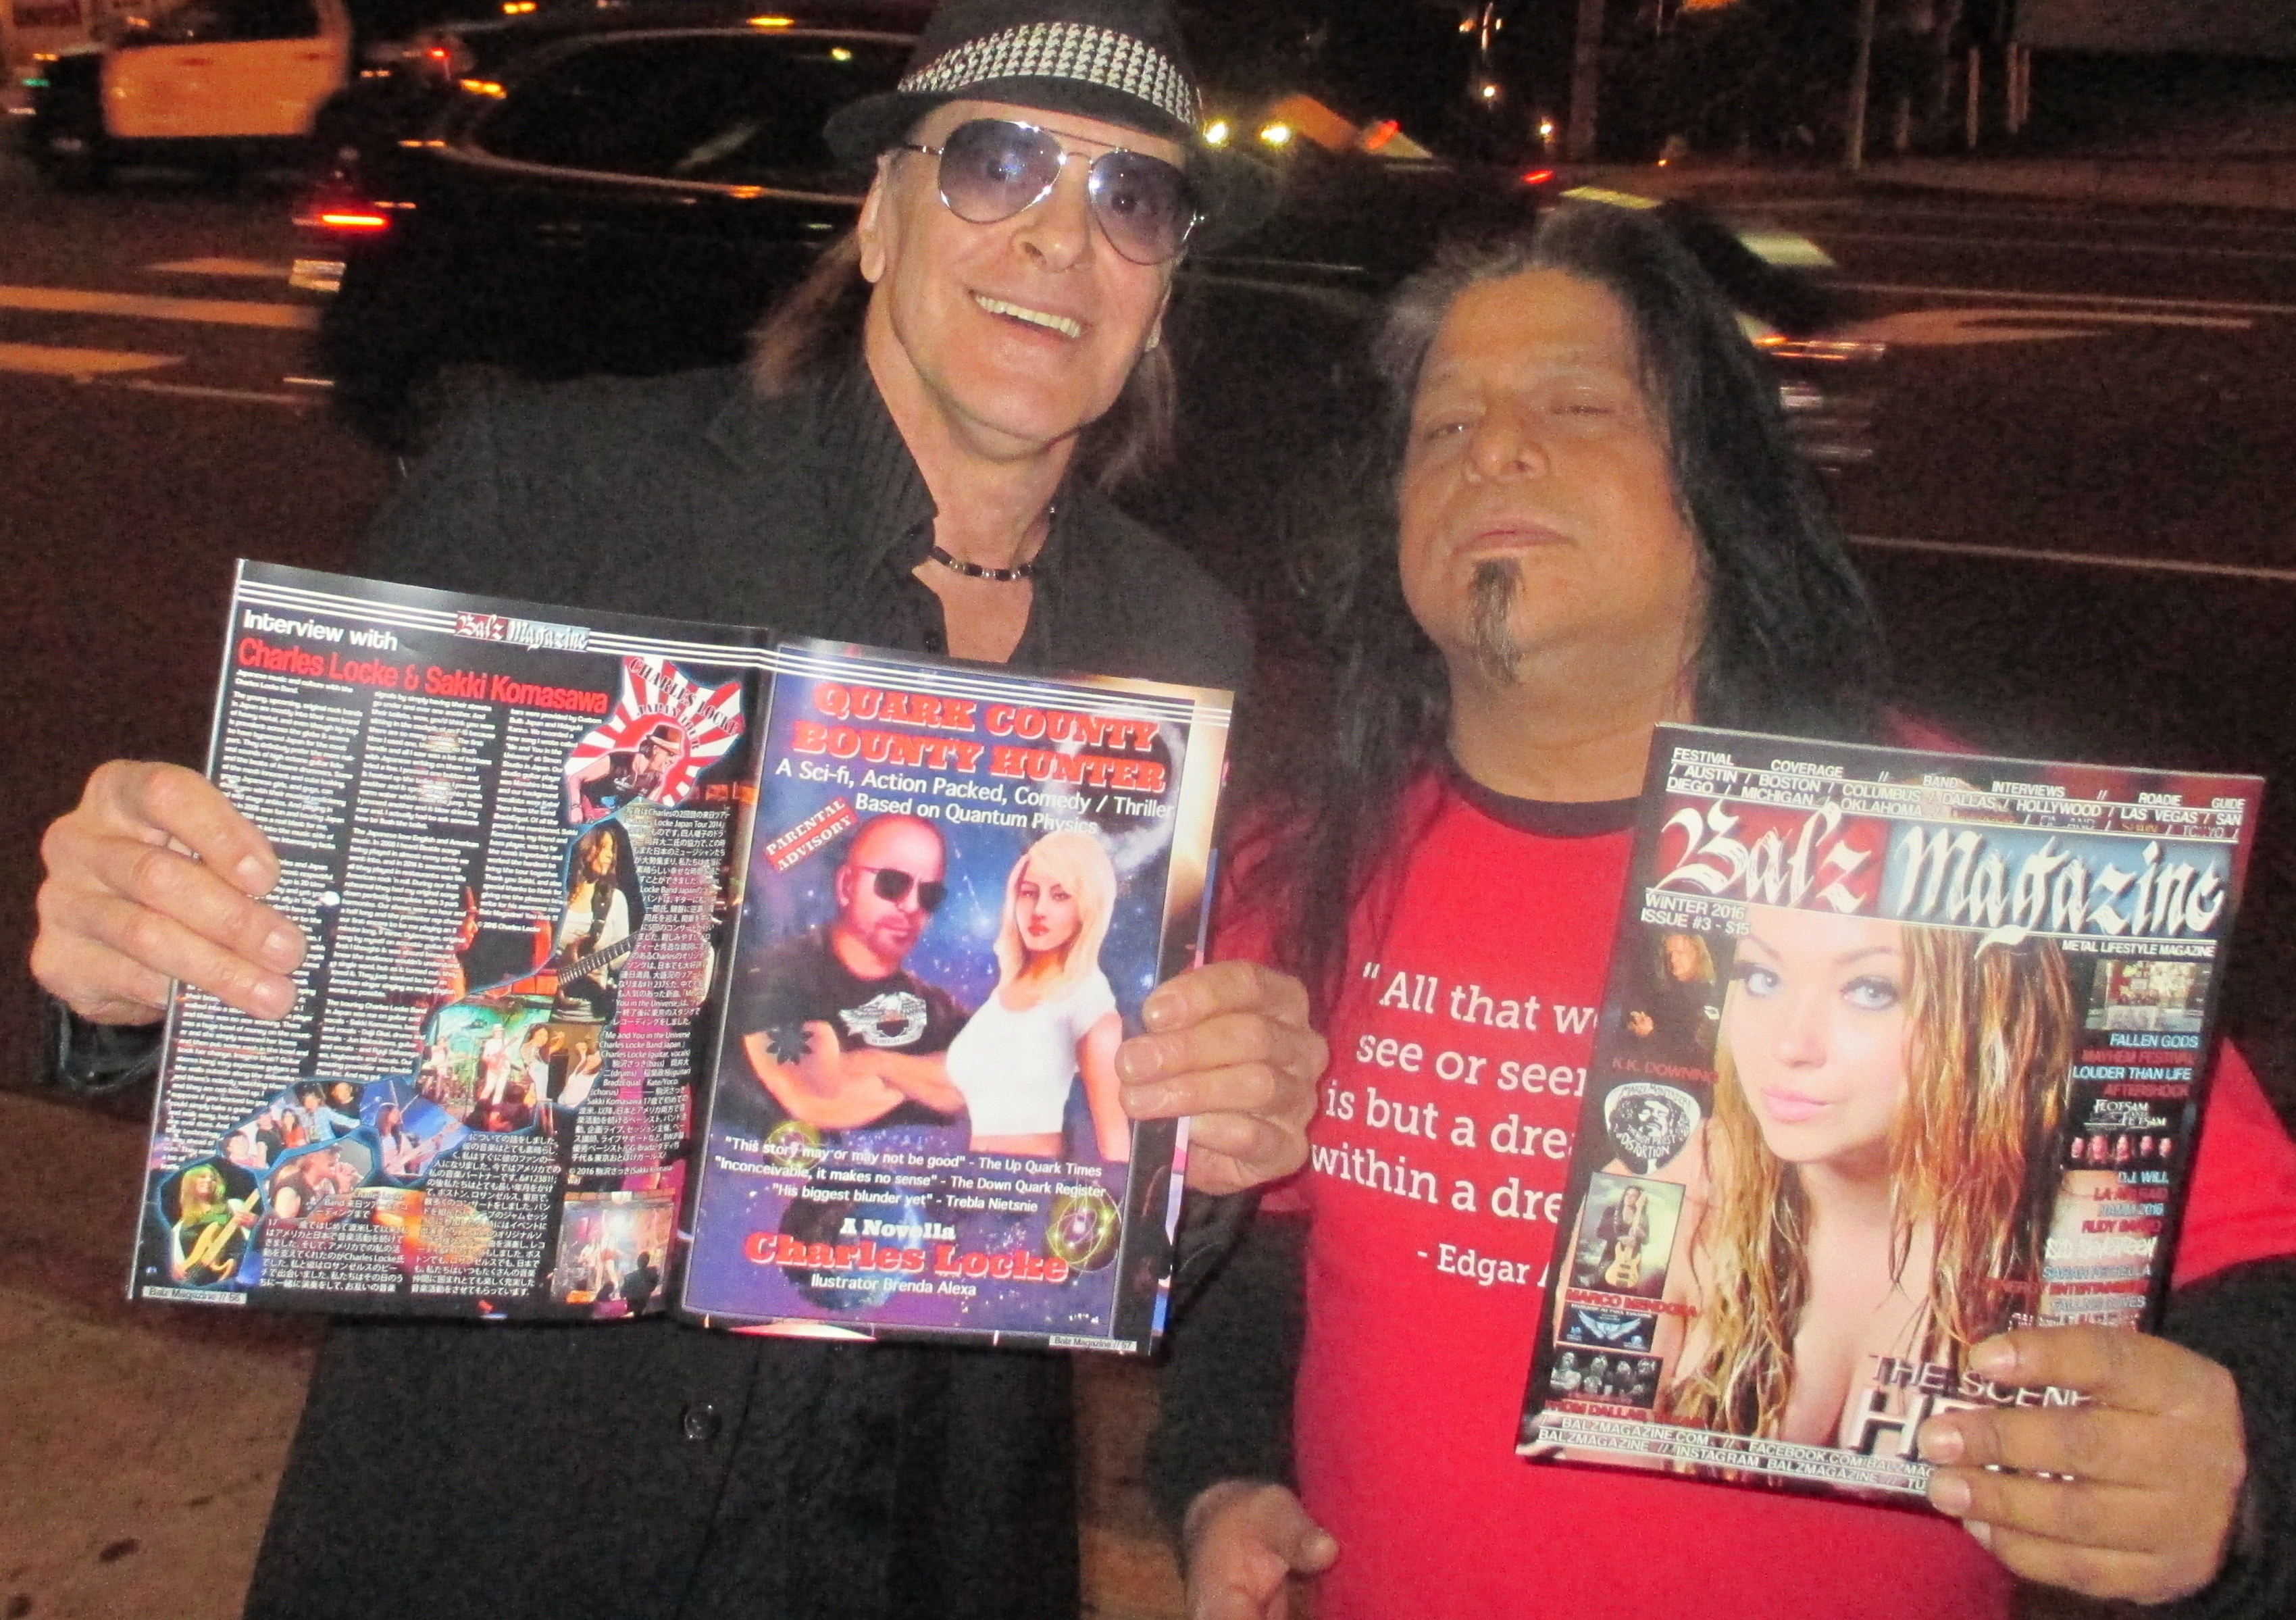 I write for a new magazine called Balz Magazine and Stoney Jackson, with me, is the owner and publisher. - We met at Ultimate Jam Night at the Whisky a Go Go tonight in Hollywood, California, April 13th, 2016. - My article is about rock & roll in Japan, and Sakki Komasawa also wrote about our Japan tour in Japanese. - And the picture on the right page is the cover of my sci-fi novel called "Quark County Bounty Hunter" which was illustrated by Brenda Alexsandra... thanks for the copies Stoney !!!

Charles Locke (Govatsos)